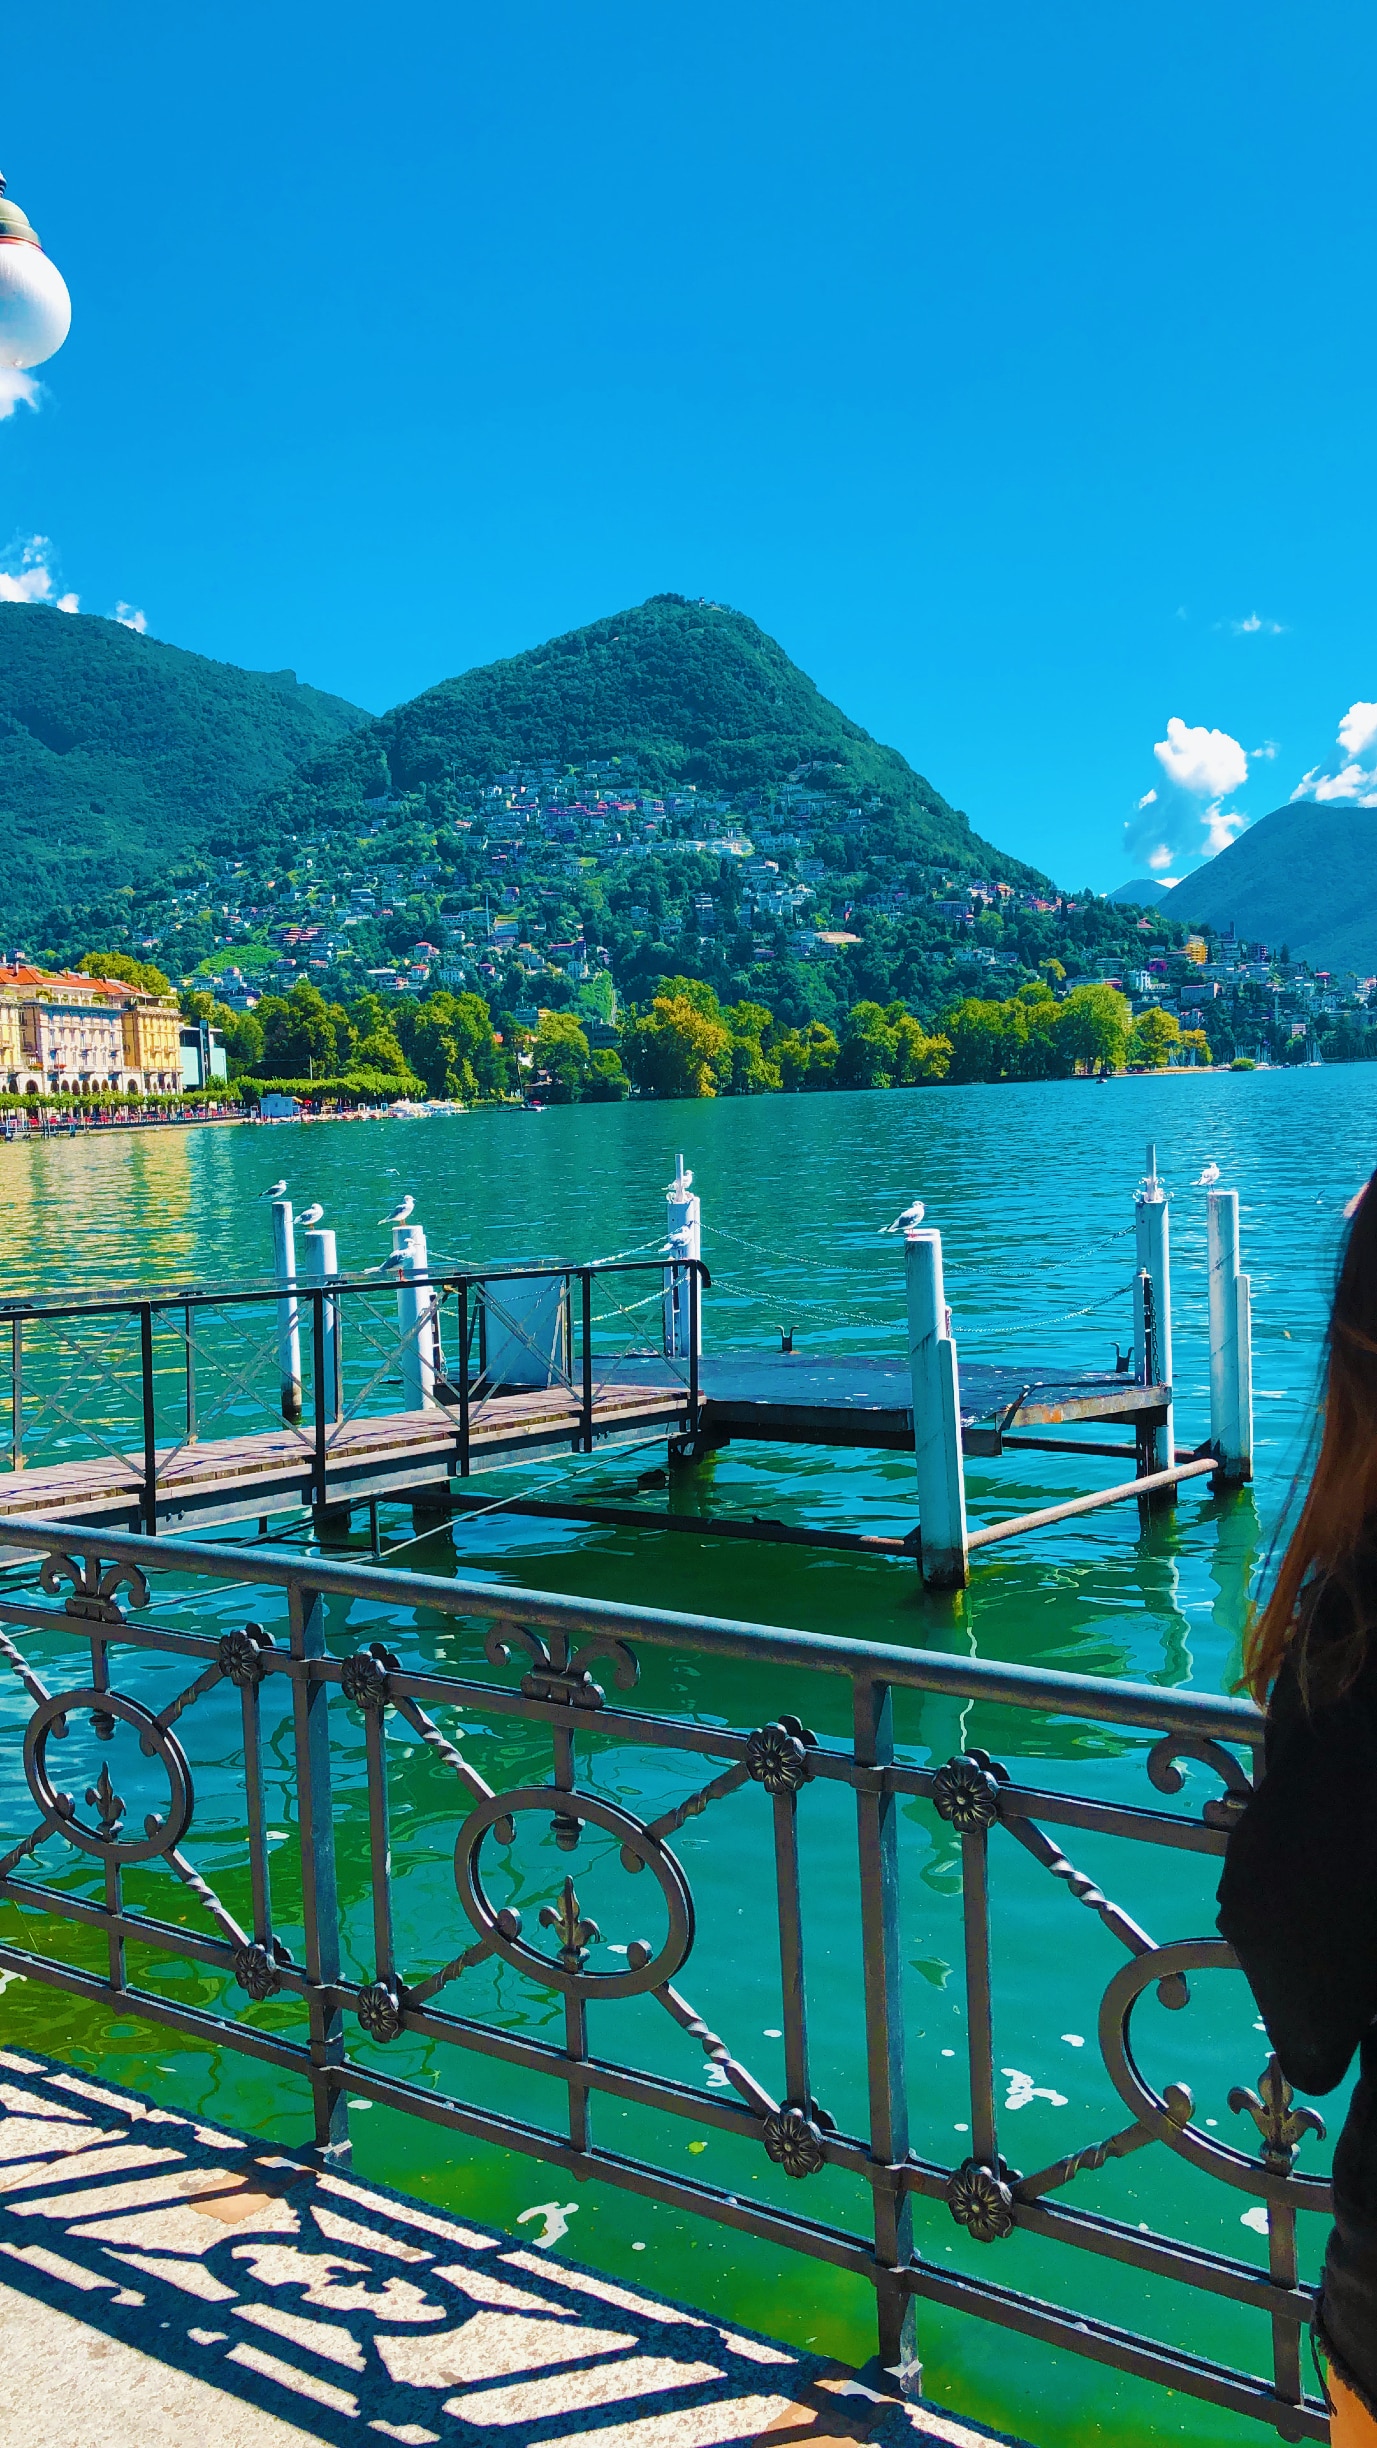 One day in Lugano